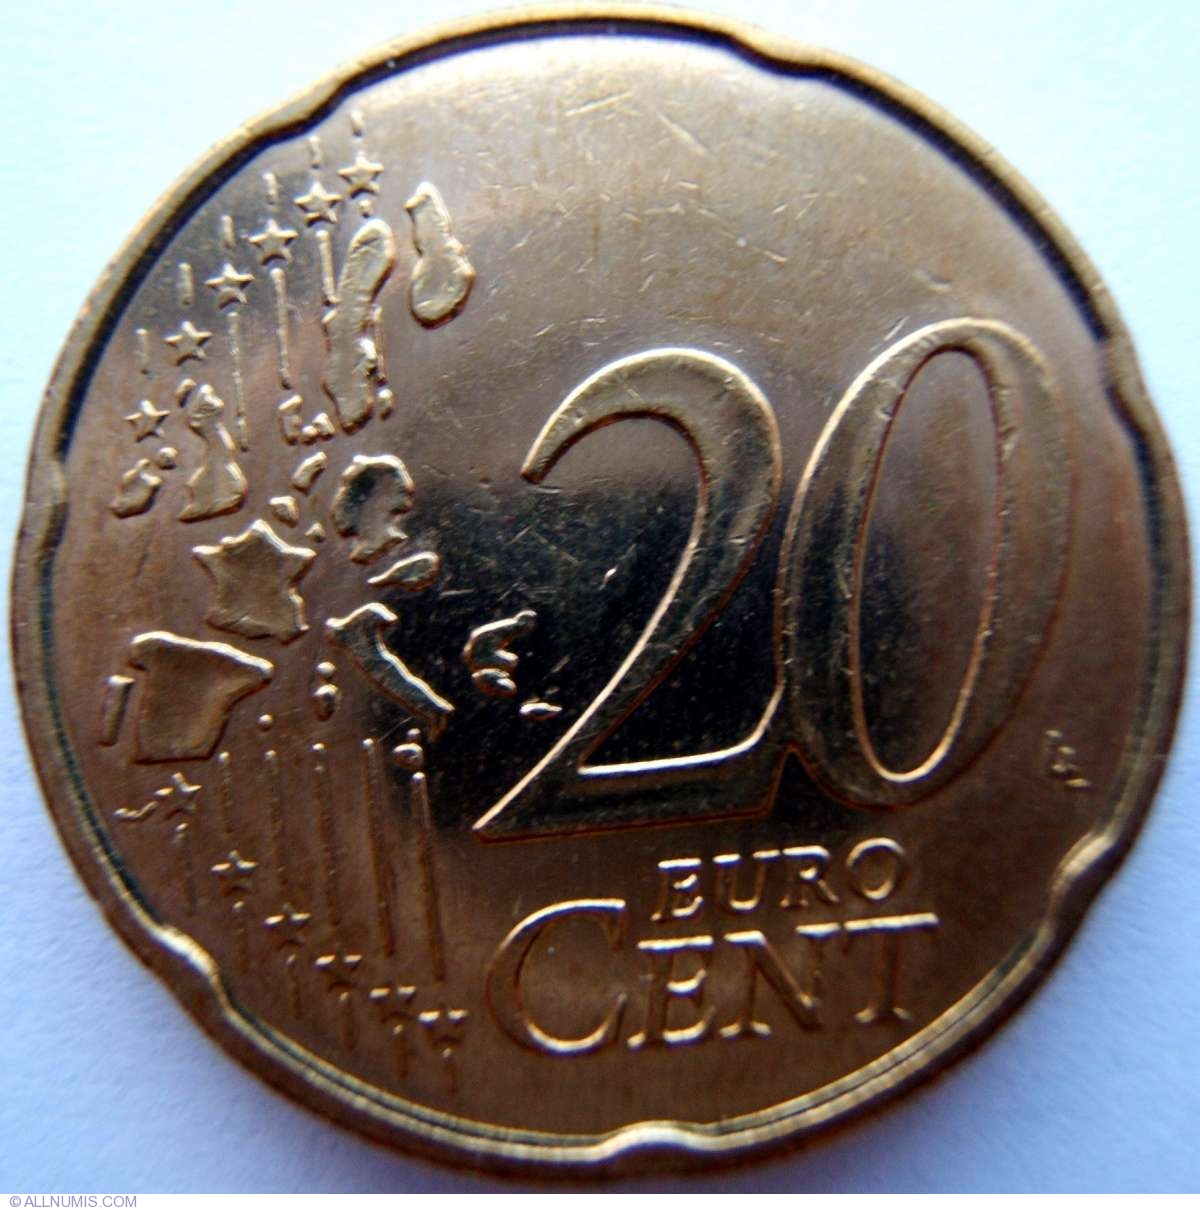 20 euro cent to usd